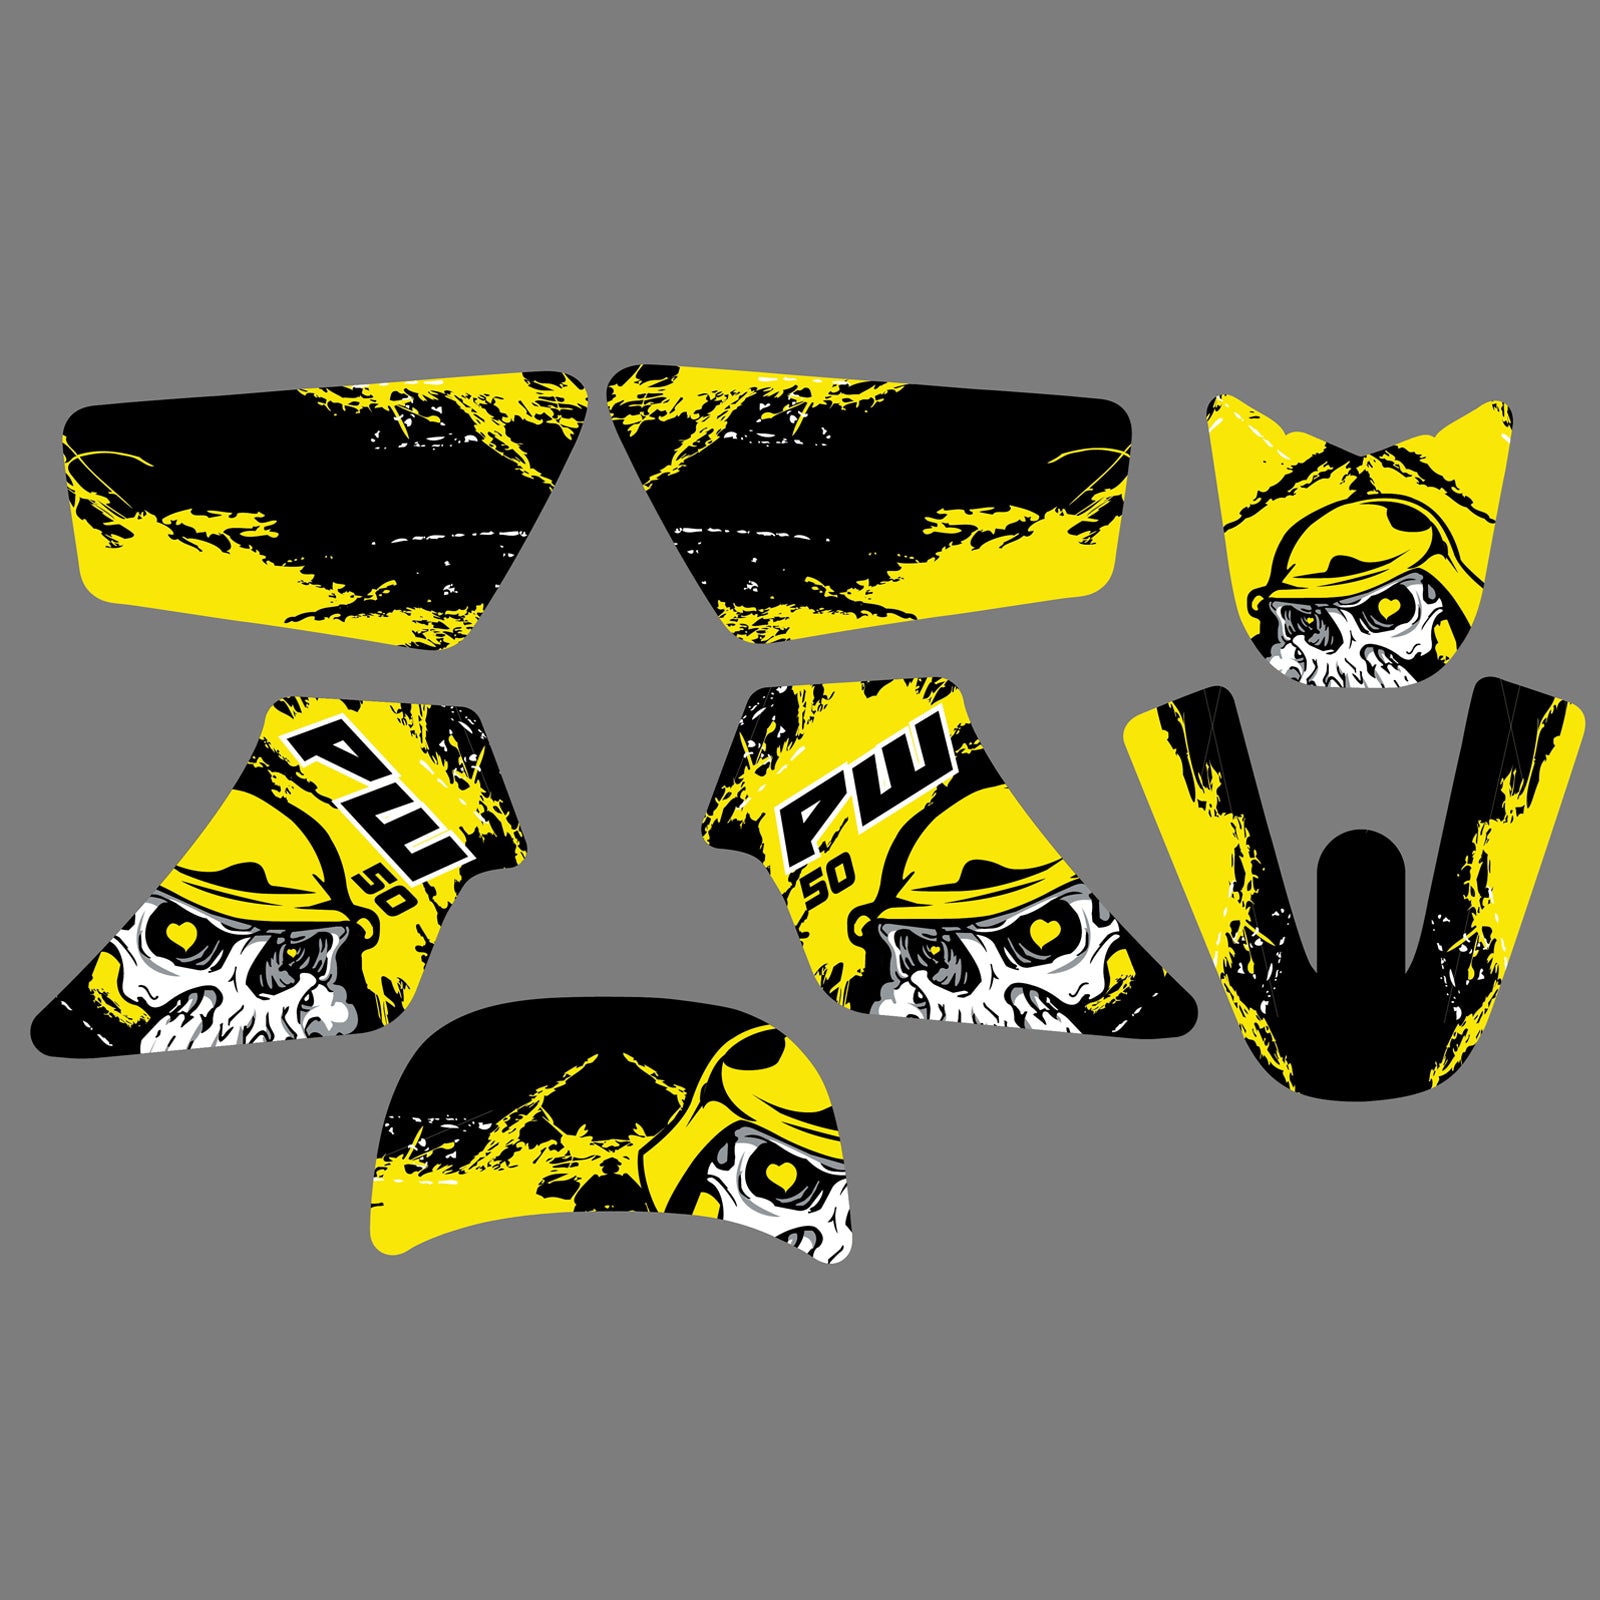 Team Graphics Background Decals Stickers For Yamaha PW50 1981-2021 All Years